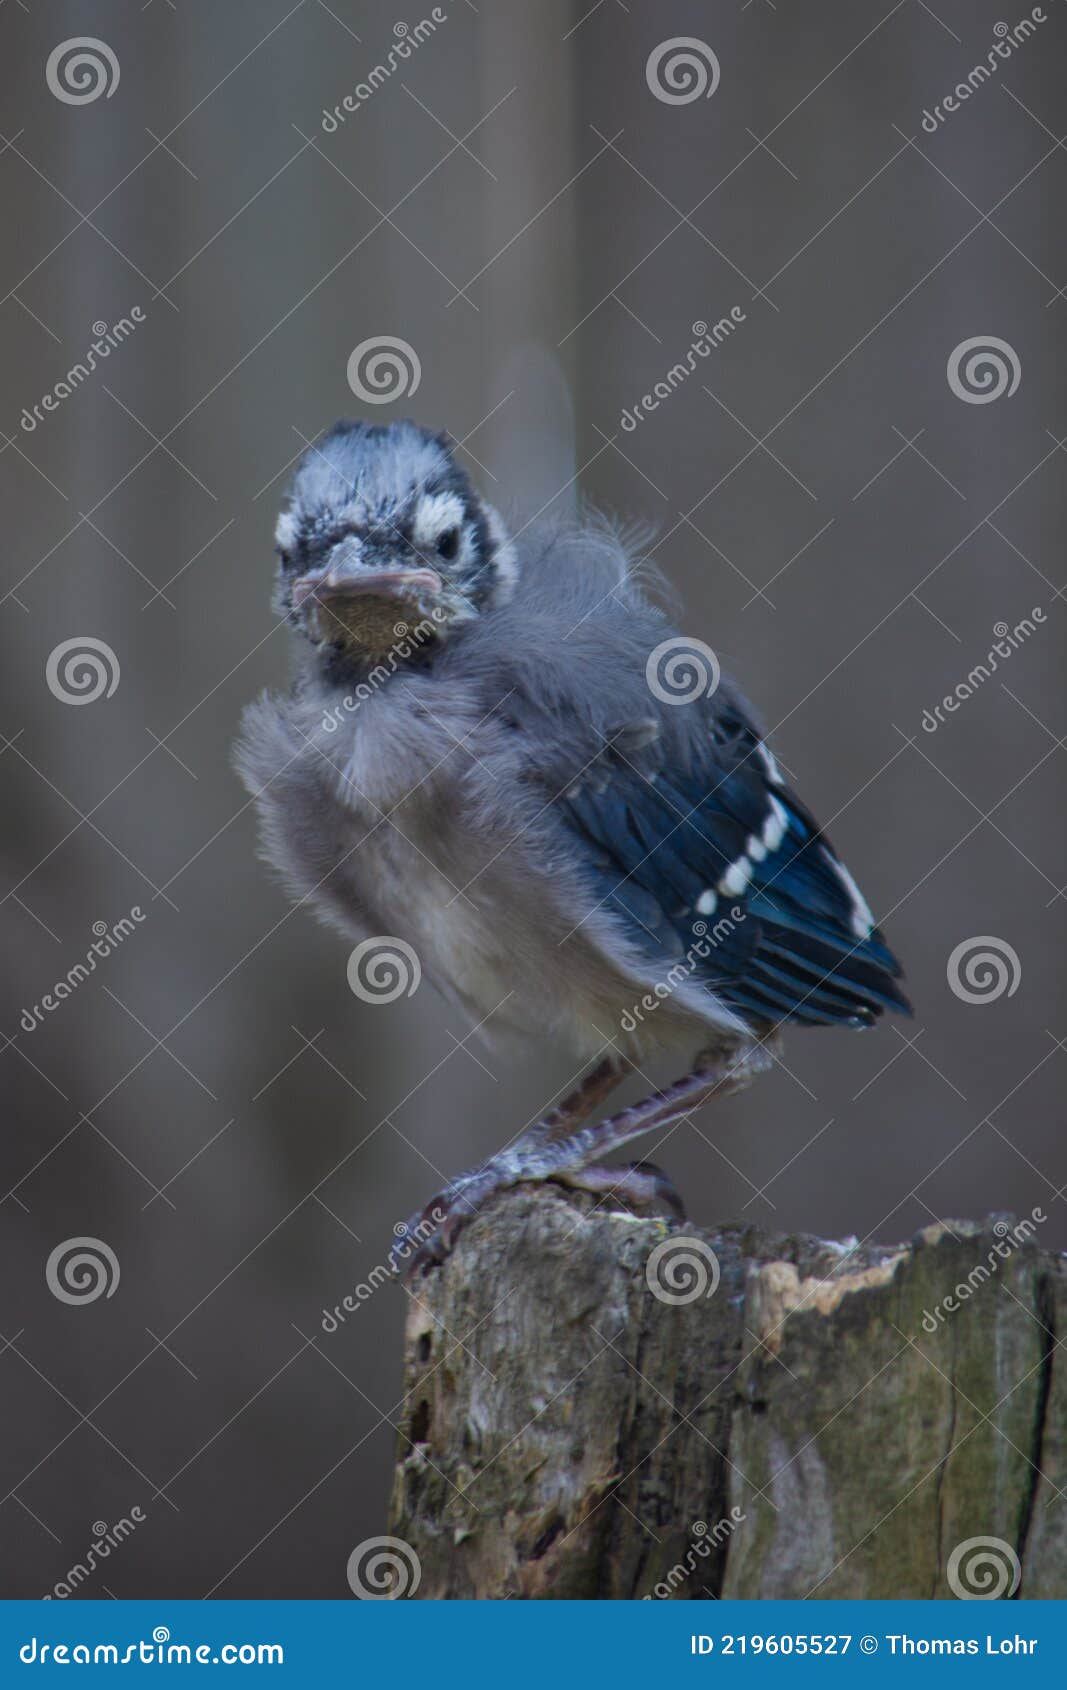 Baby Blue Jay Fledgling Bird Stock Image - Image of growing, small